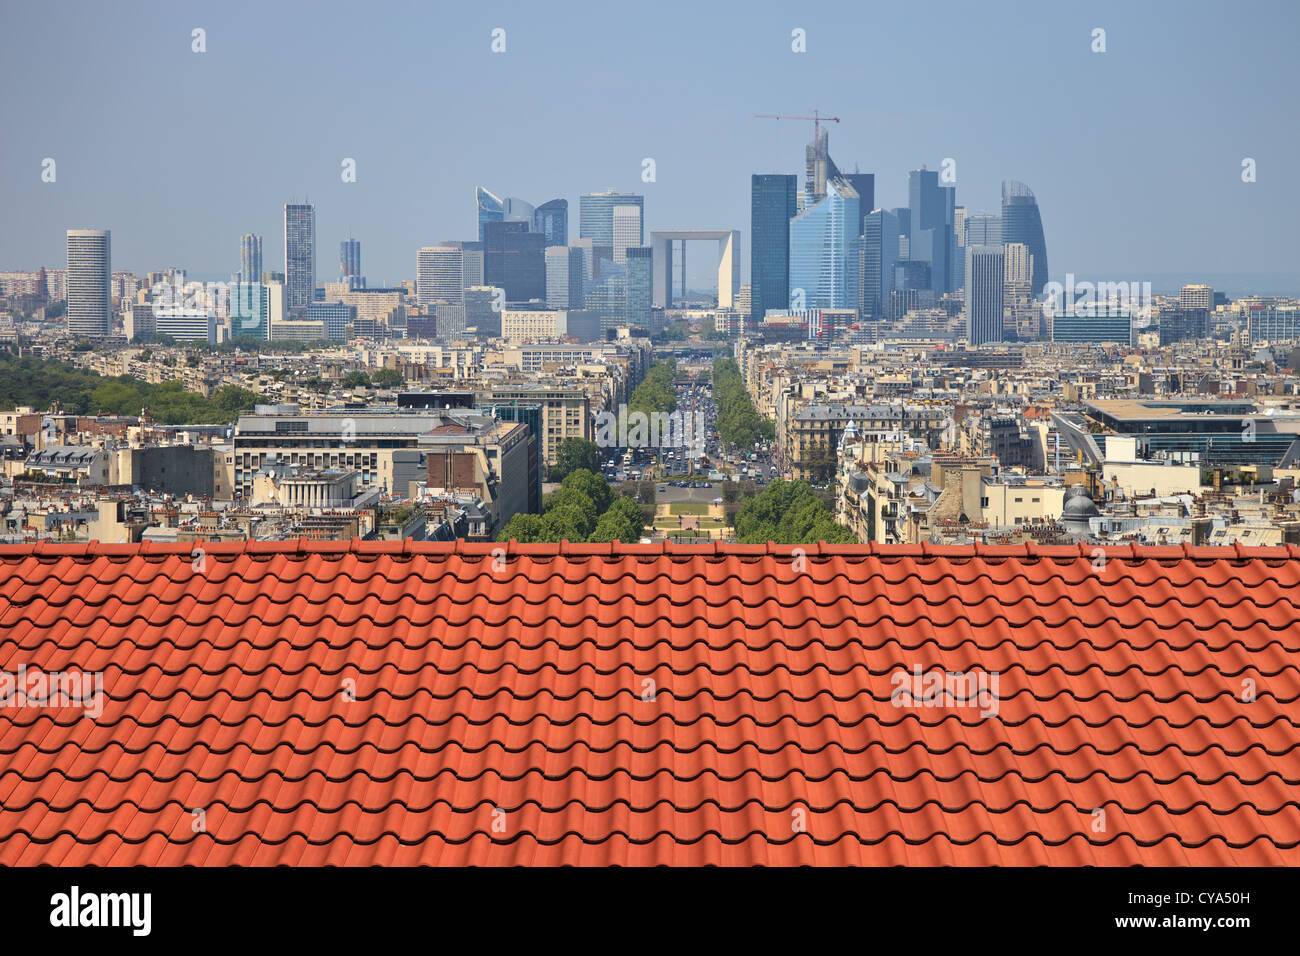 The view from the roof of the diverse architecture of Paris, France. Stock Photo